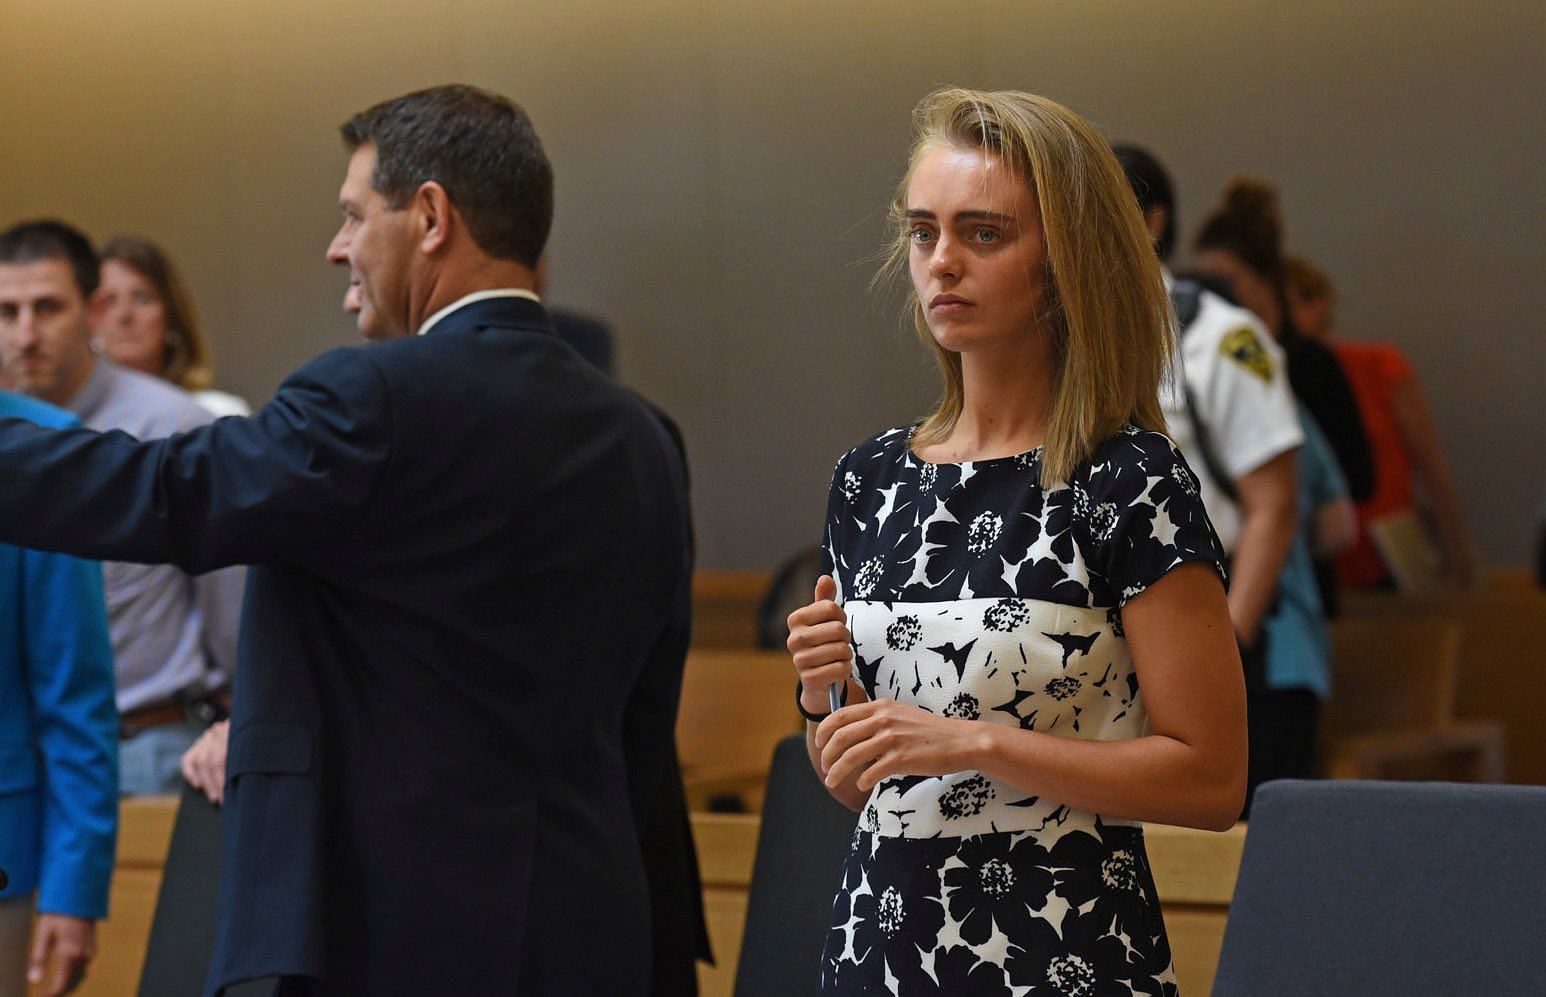 Michelle Carter was released from prison in January 2020 (Image via rafiews/Twitter)